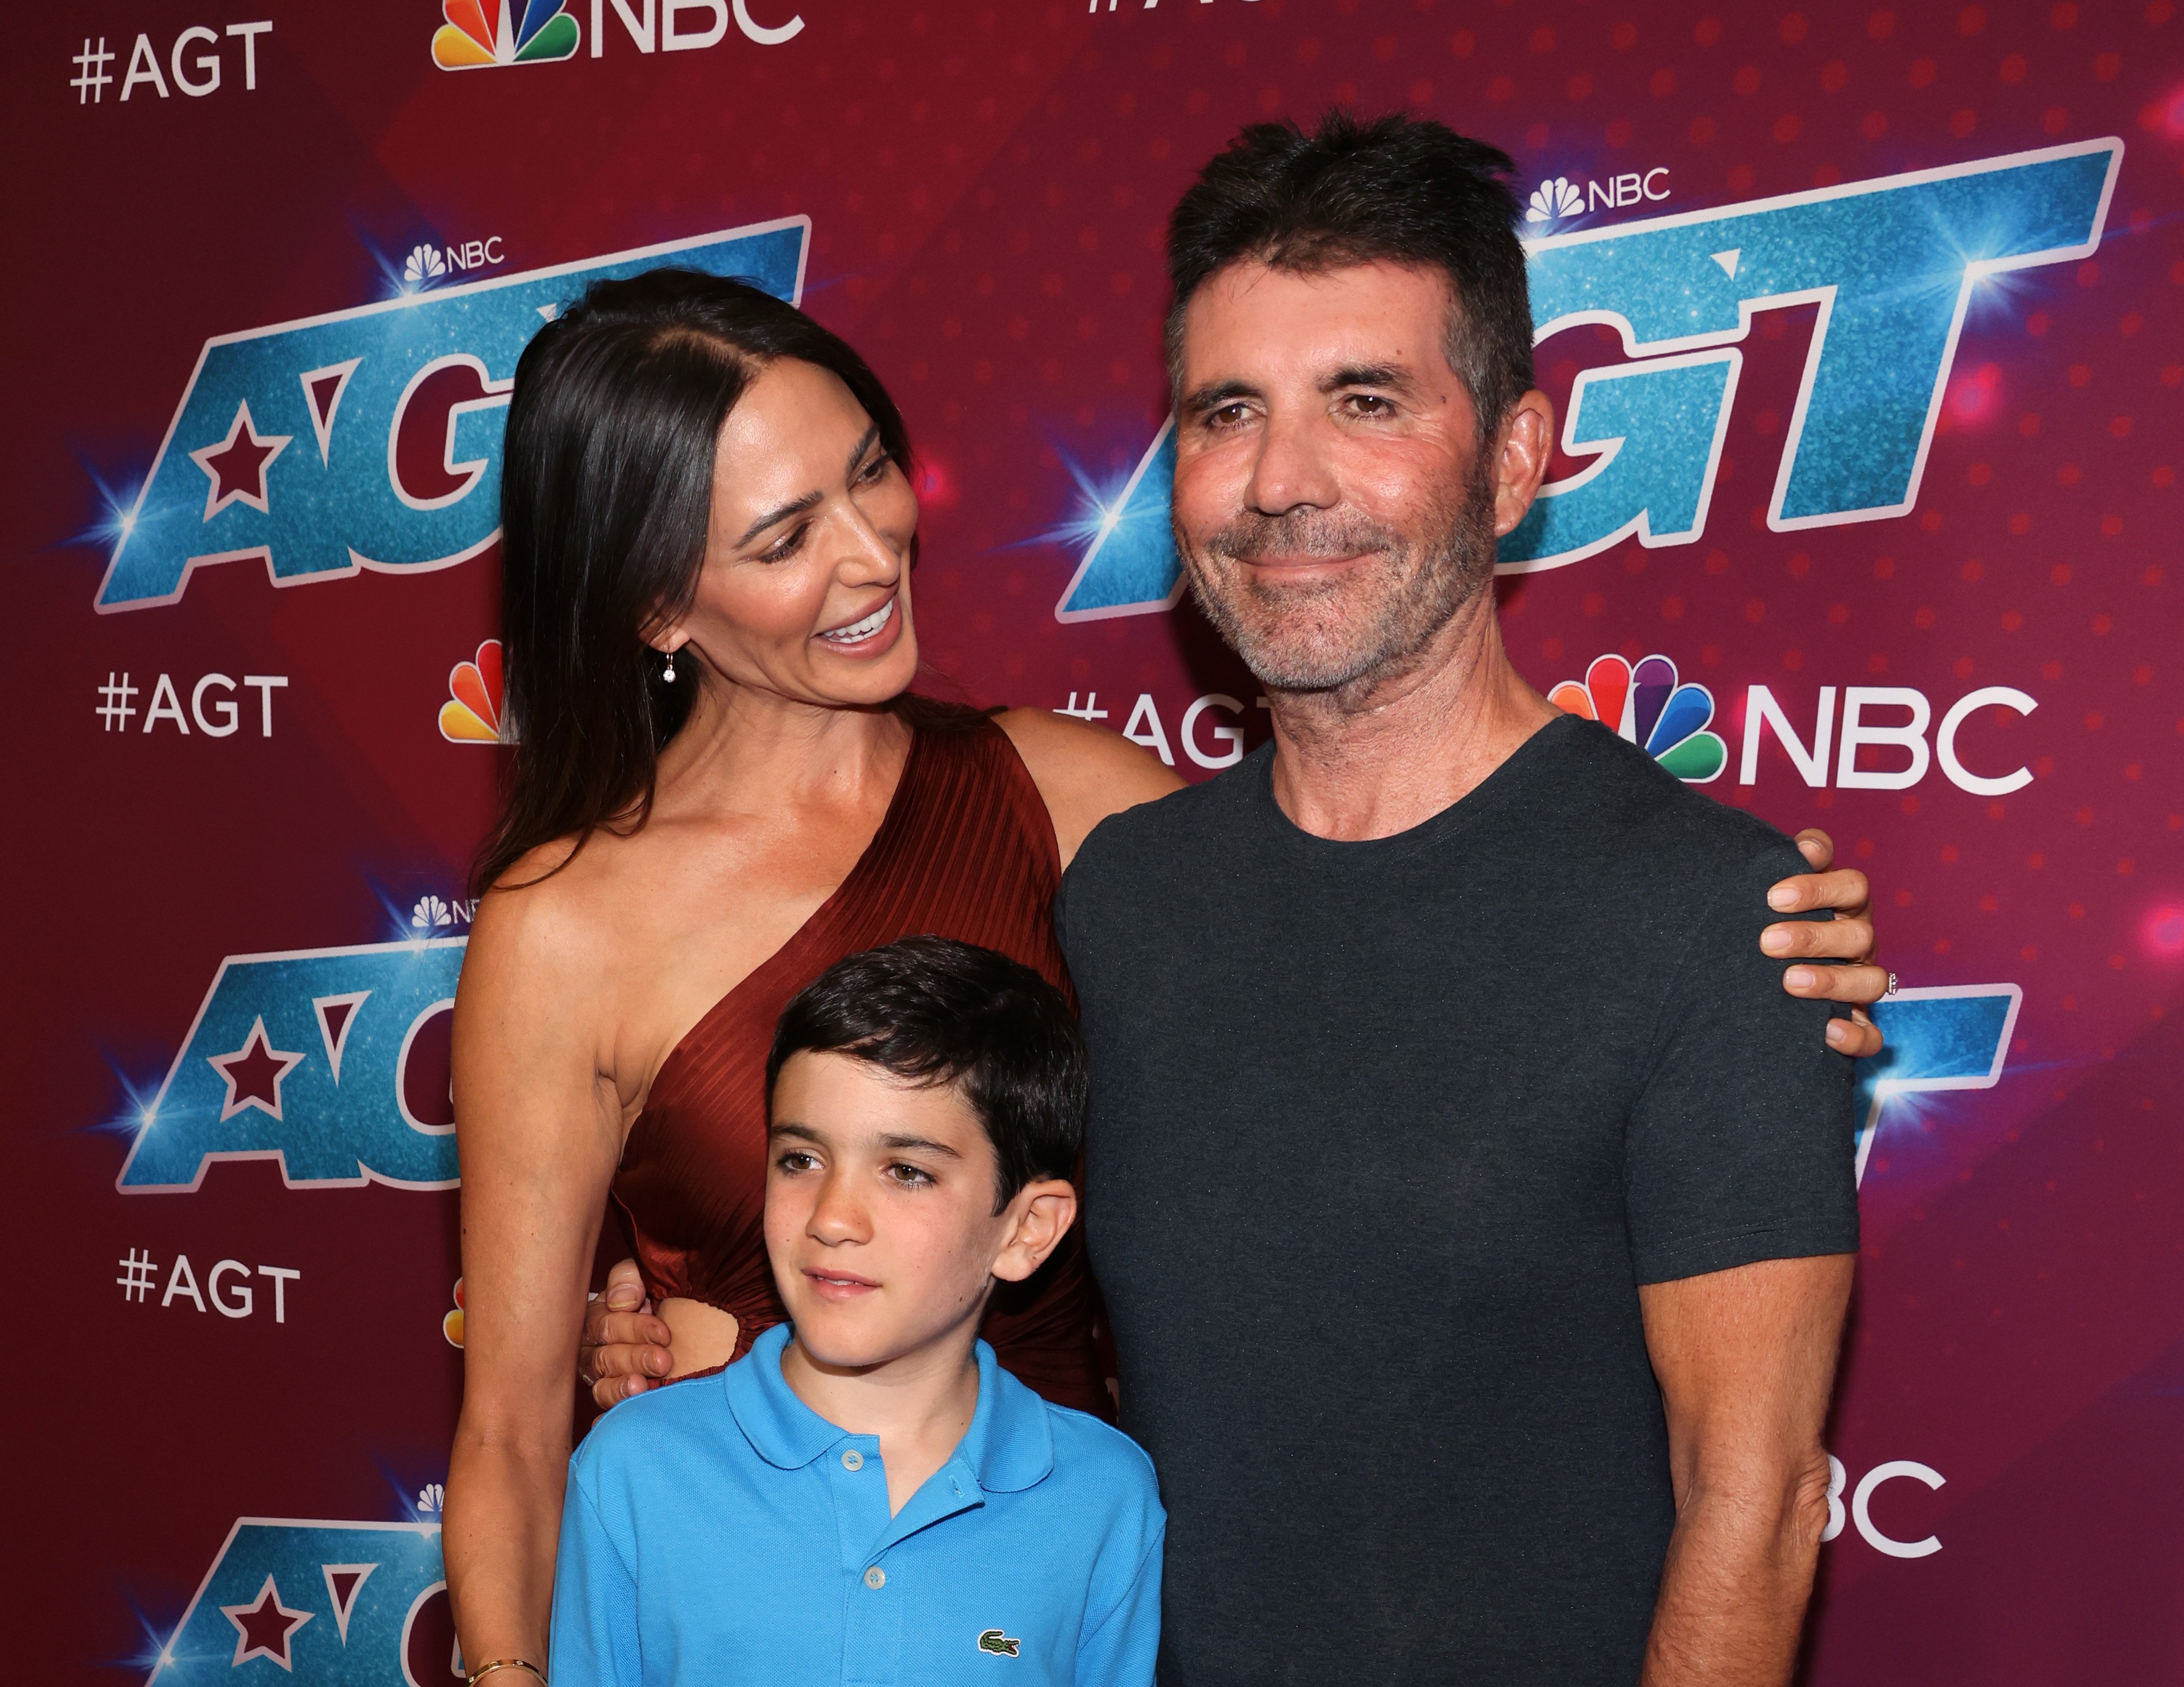 Lauren Silverman, Eric Cowell and Simon Cowell attend the red carpet for "America's Got Talent" Season 17 live show at the Sheraton Pasadena Hotel on September 13, 2022, in Pasadena, California. | Source: Getty Images